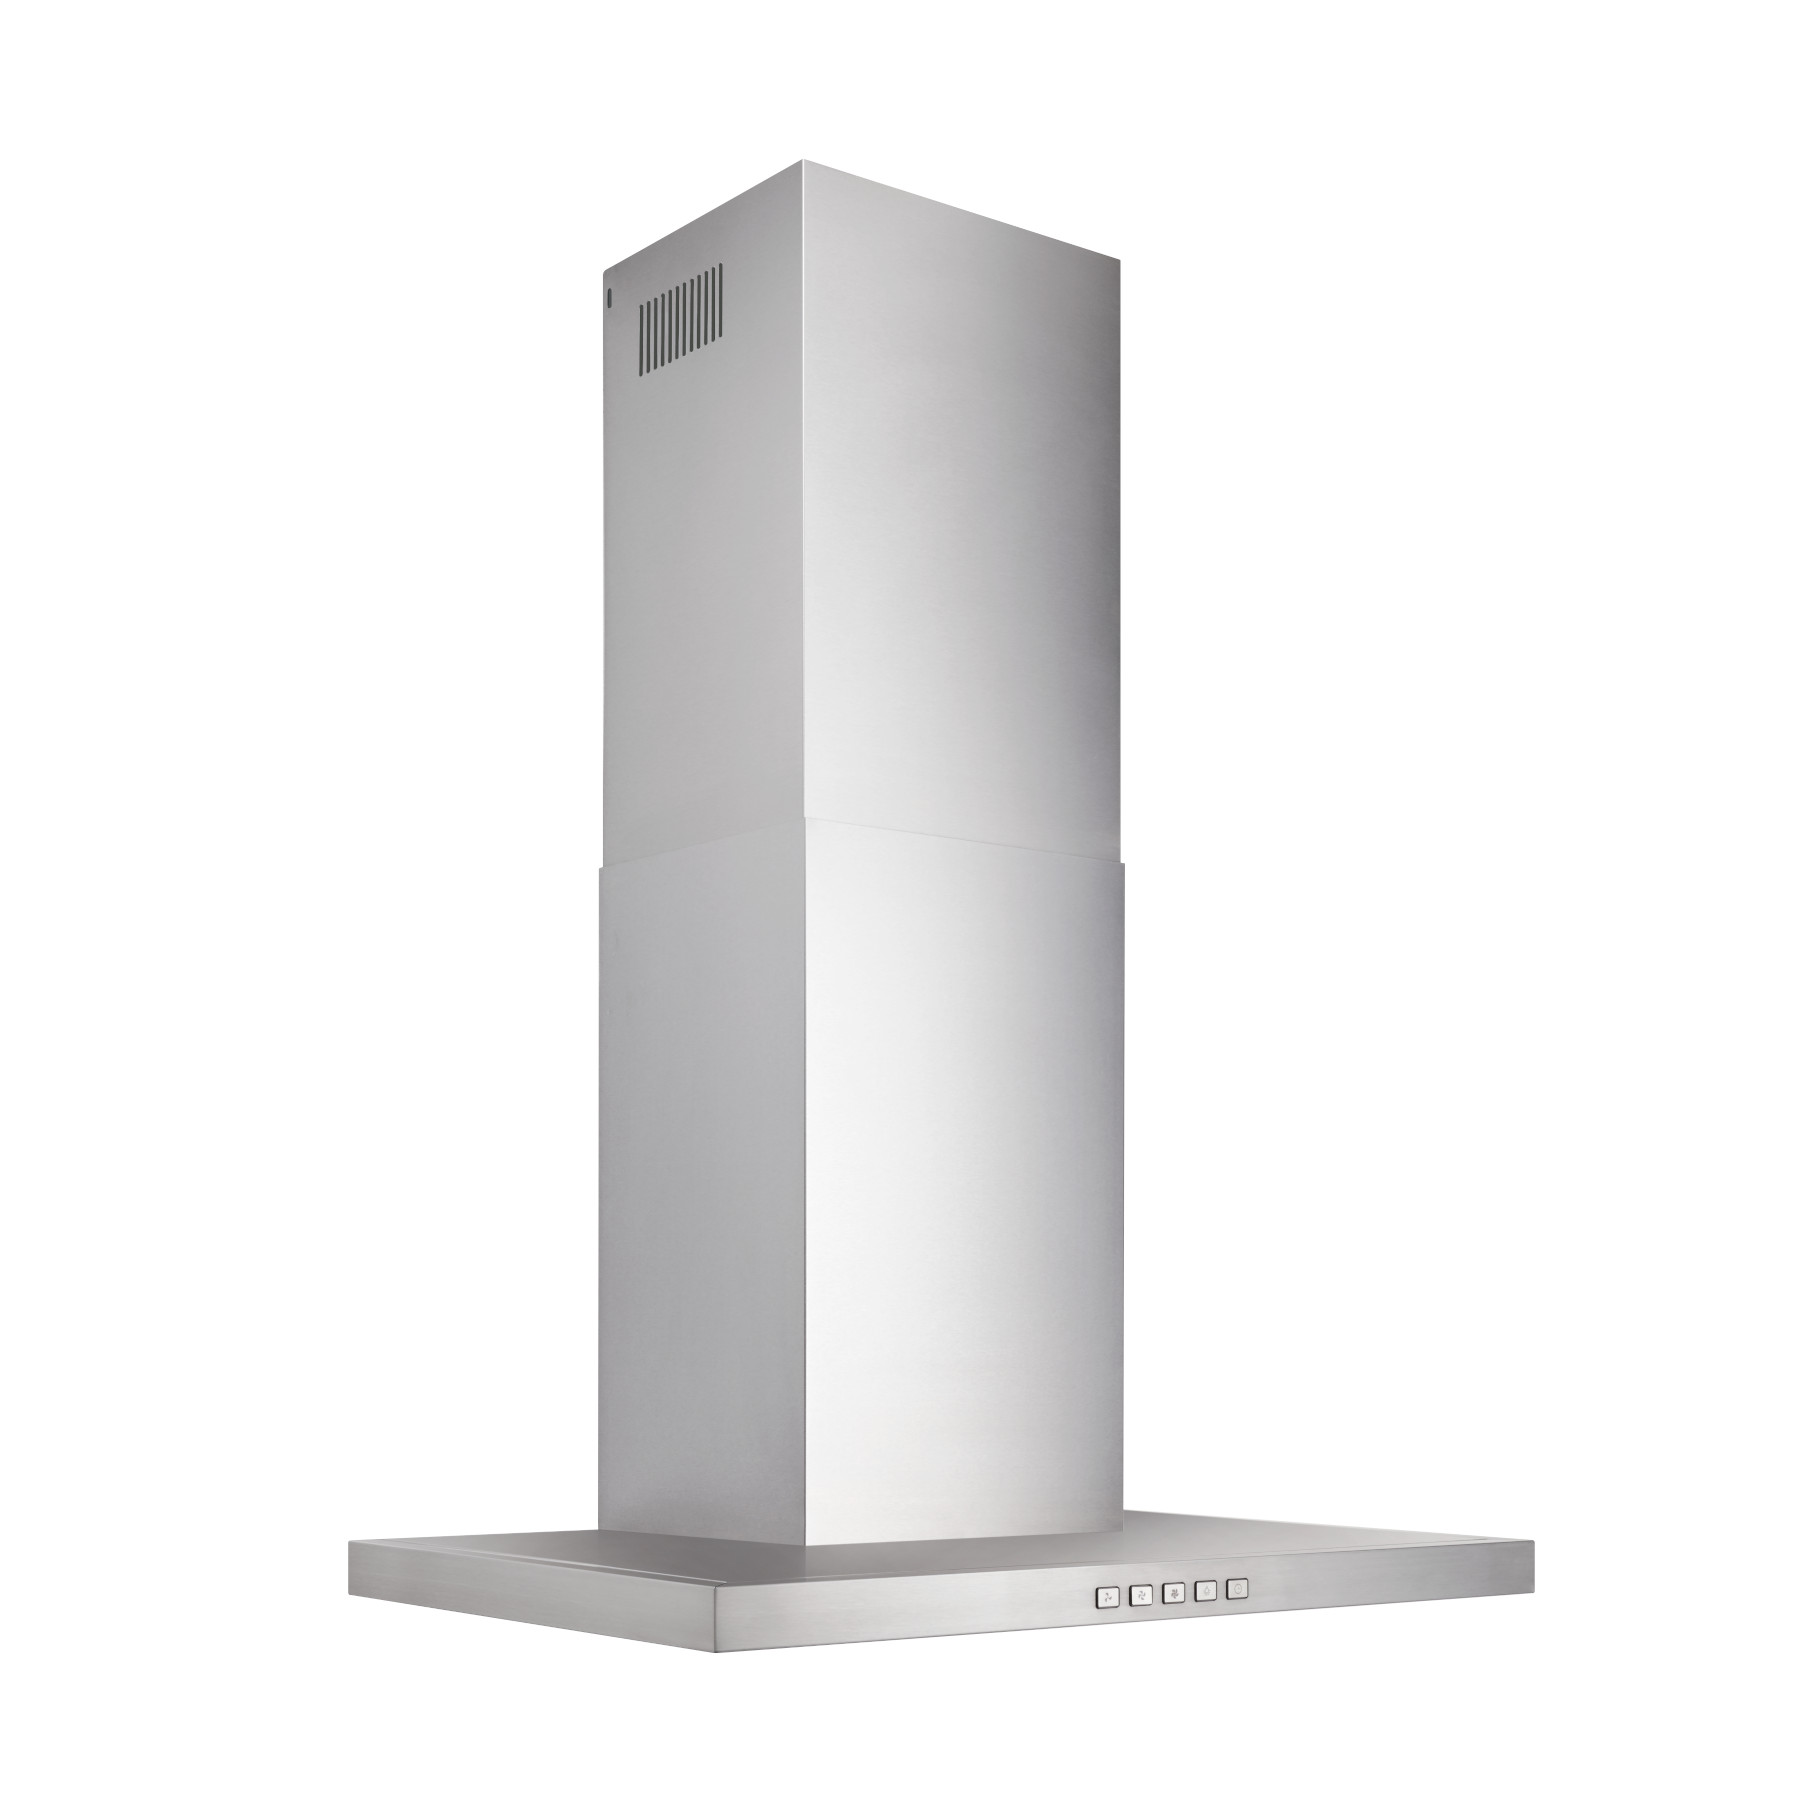 Broan® 30-Inch Convertible Wall-Mount T-Style Chimney Range Hood, 450 MAX CFM, Stainless Steel